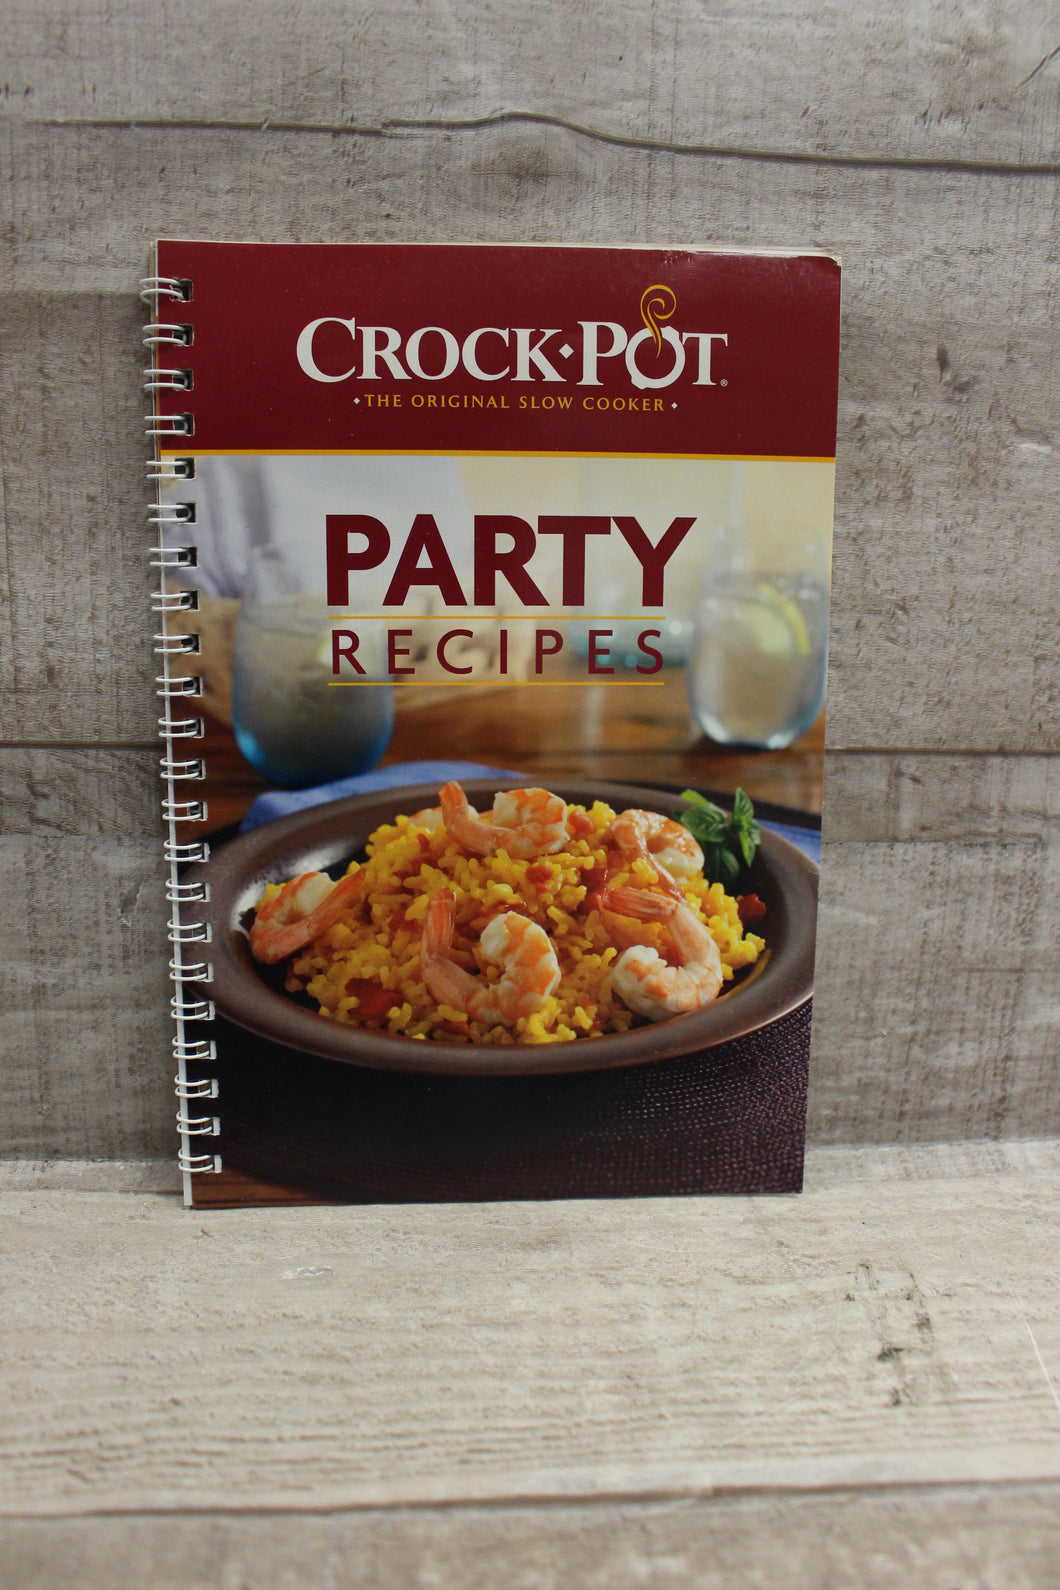 Crock Pot The Original Slow Cooker: Party Recipes Book -Used – Military  Steals and Surplus